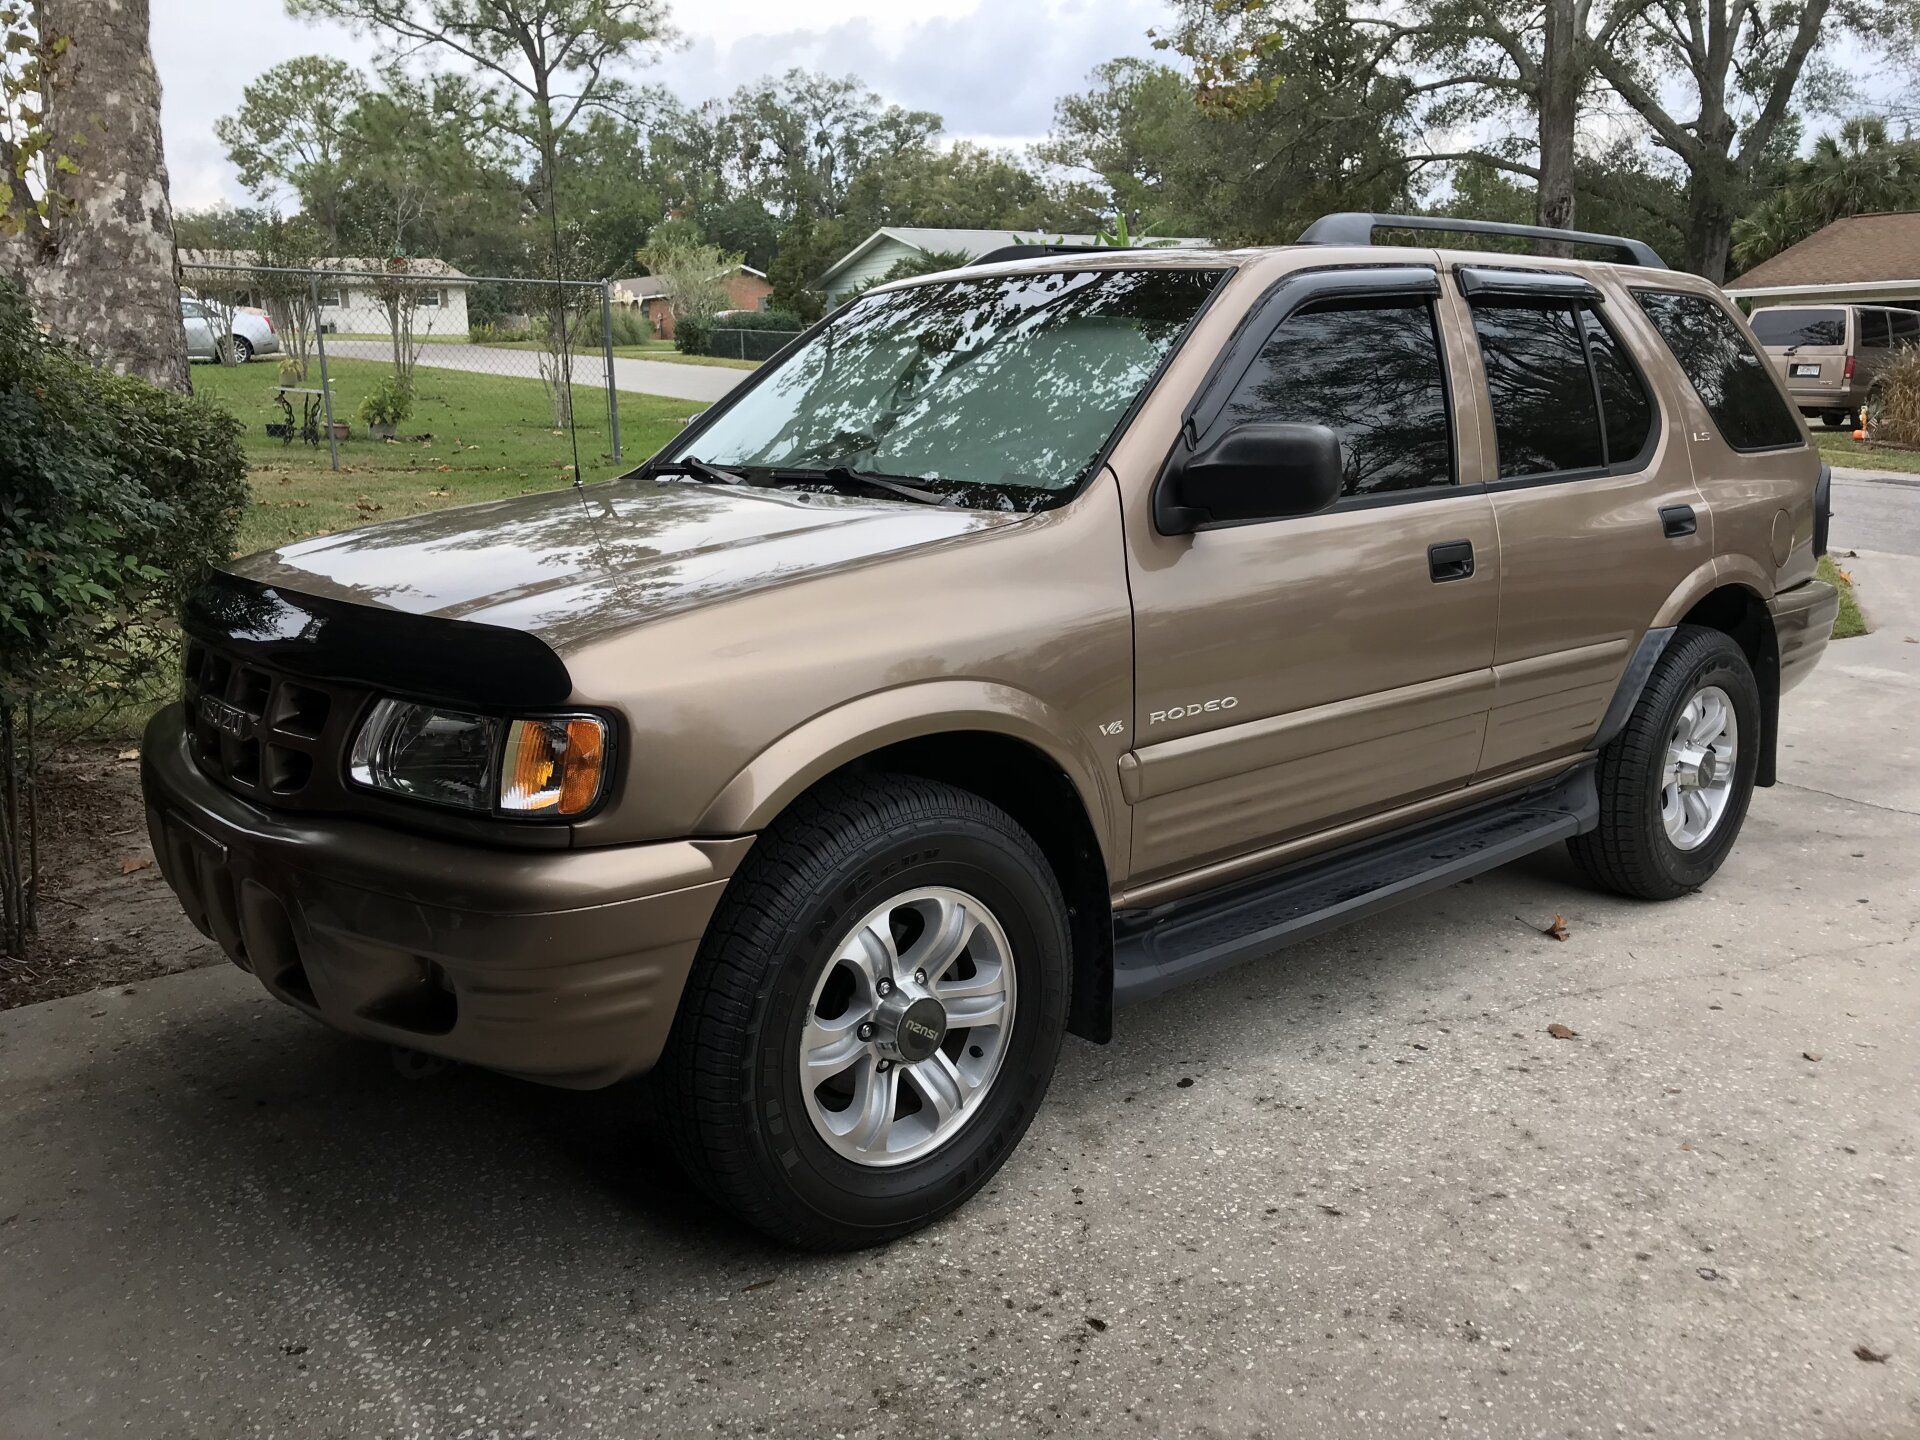 Isuzu Rodeo Still looks new after 17 years of detailing